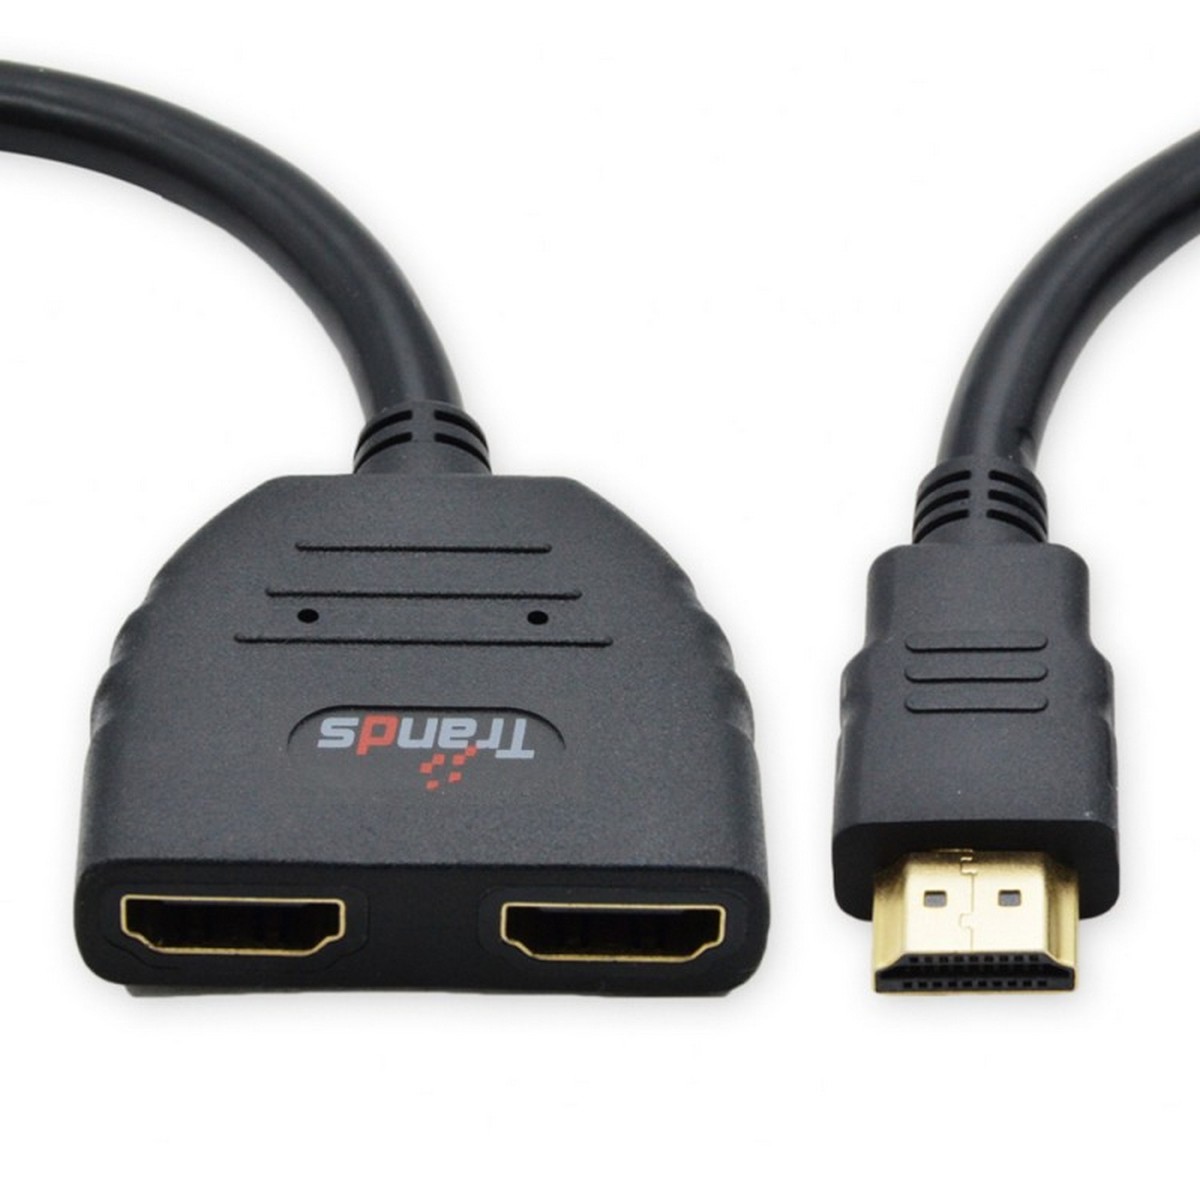 Trands HDMI Male to Female Cable CA728 1Meter